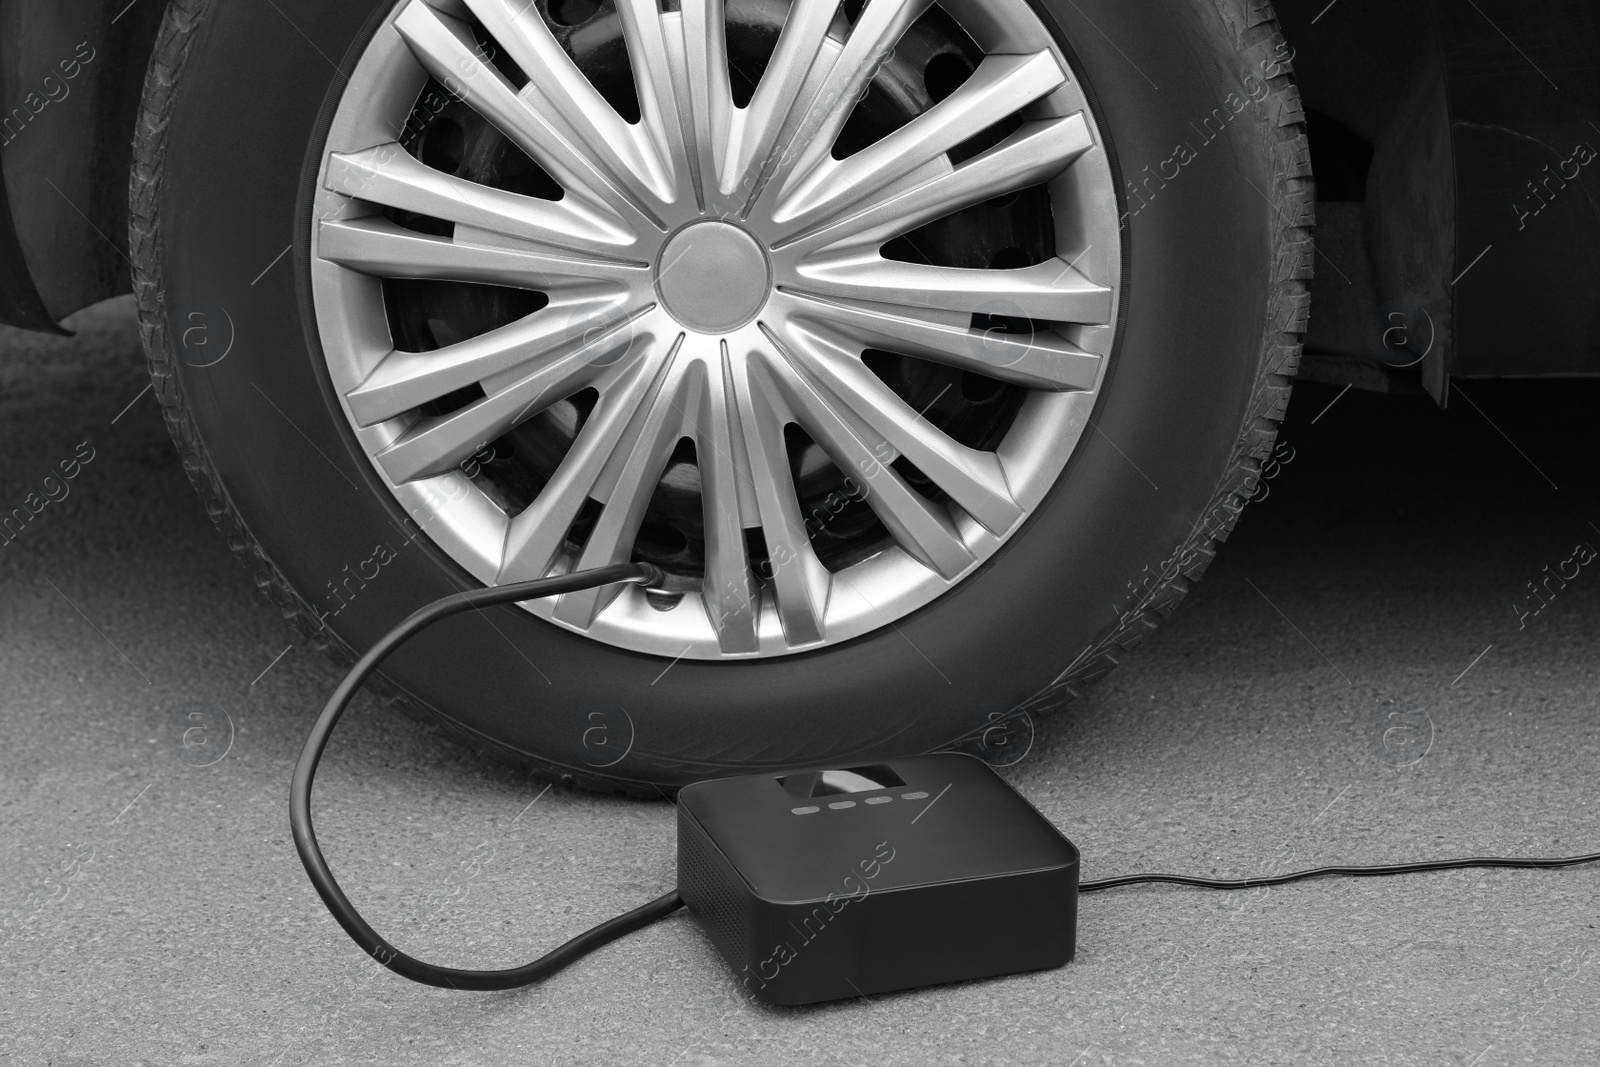 Photo of Inflating car tire with portable air pump outdoors